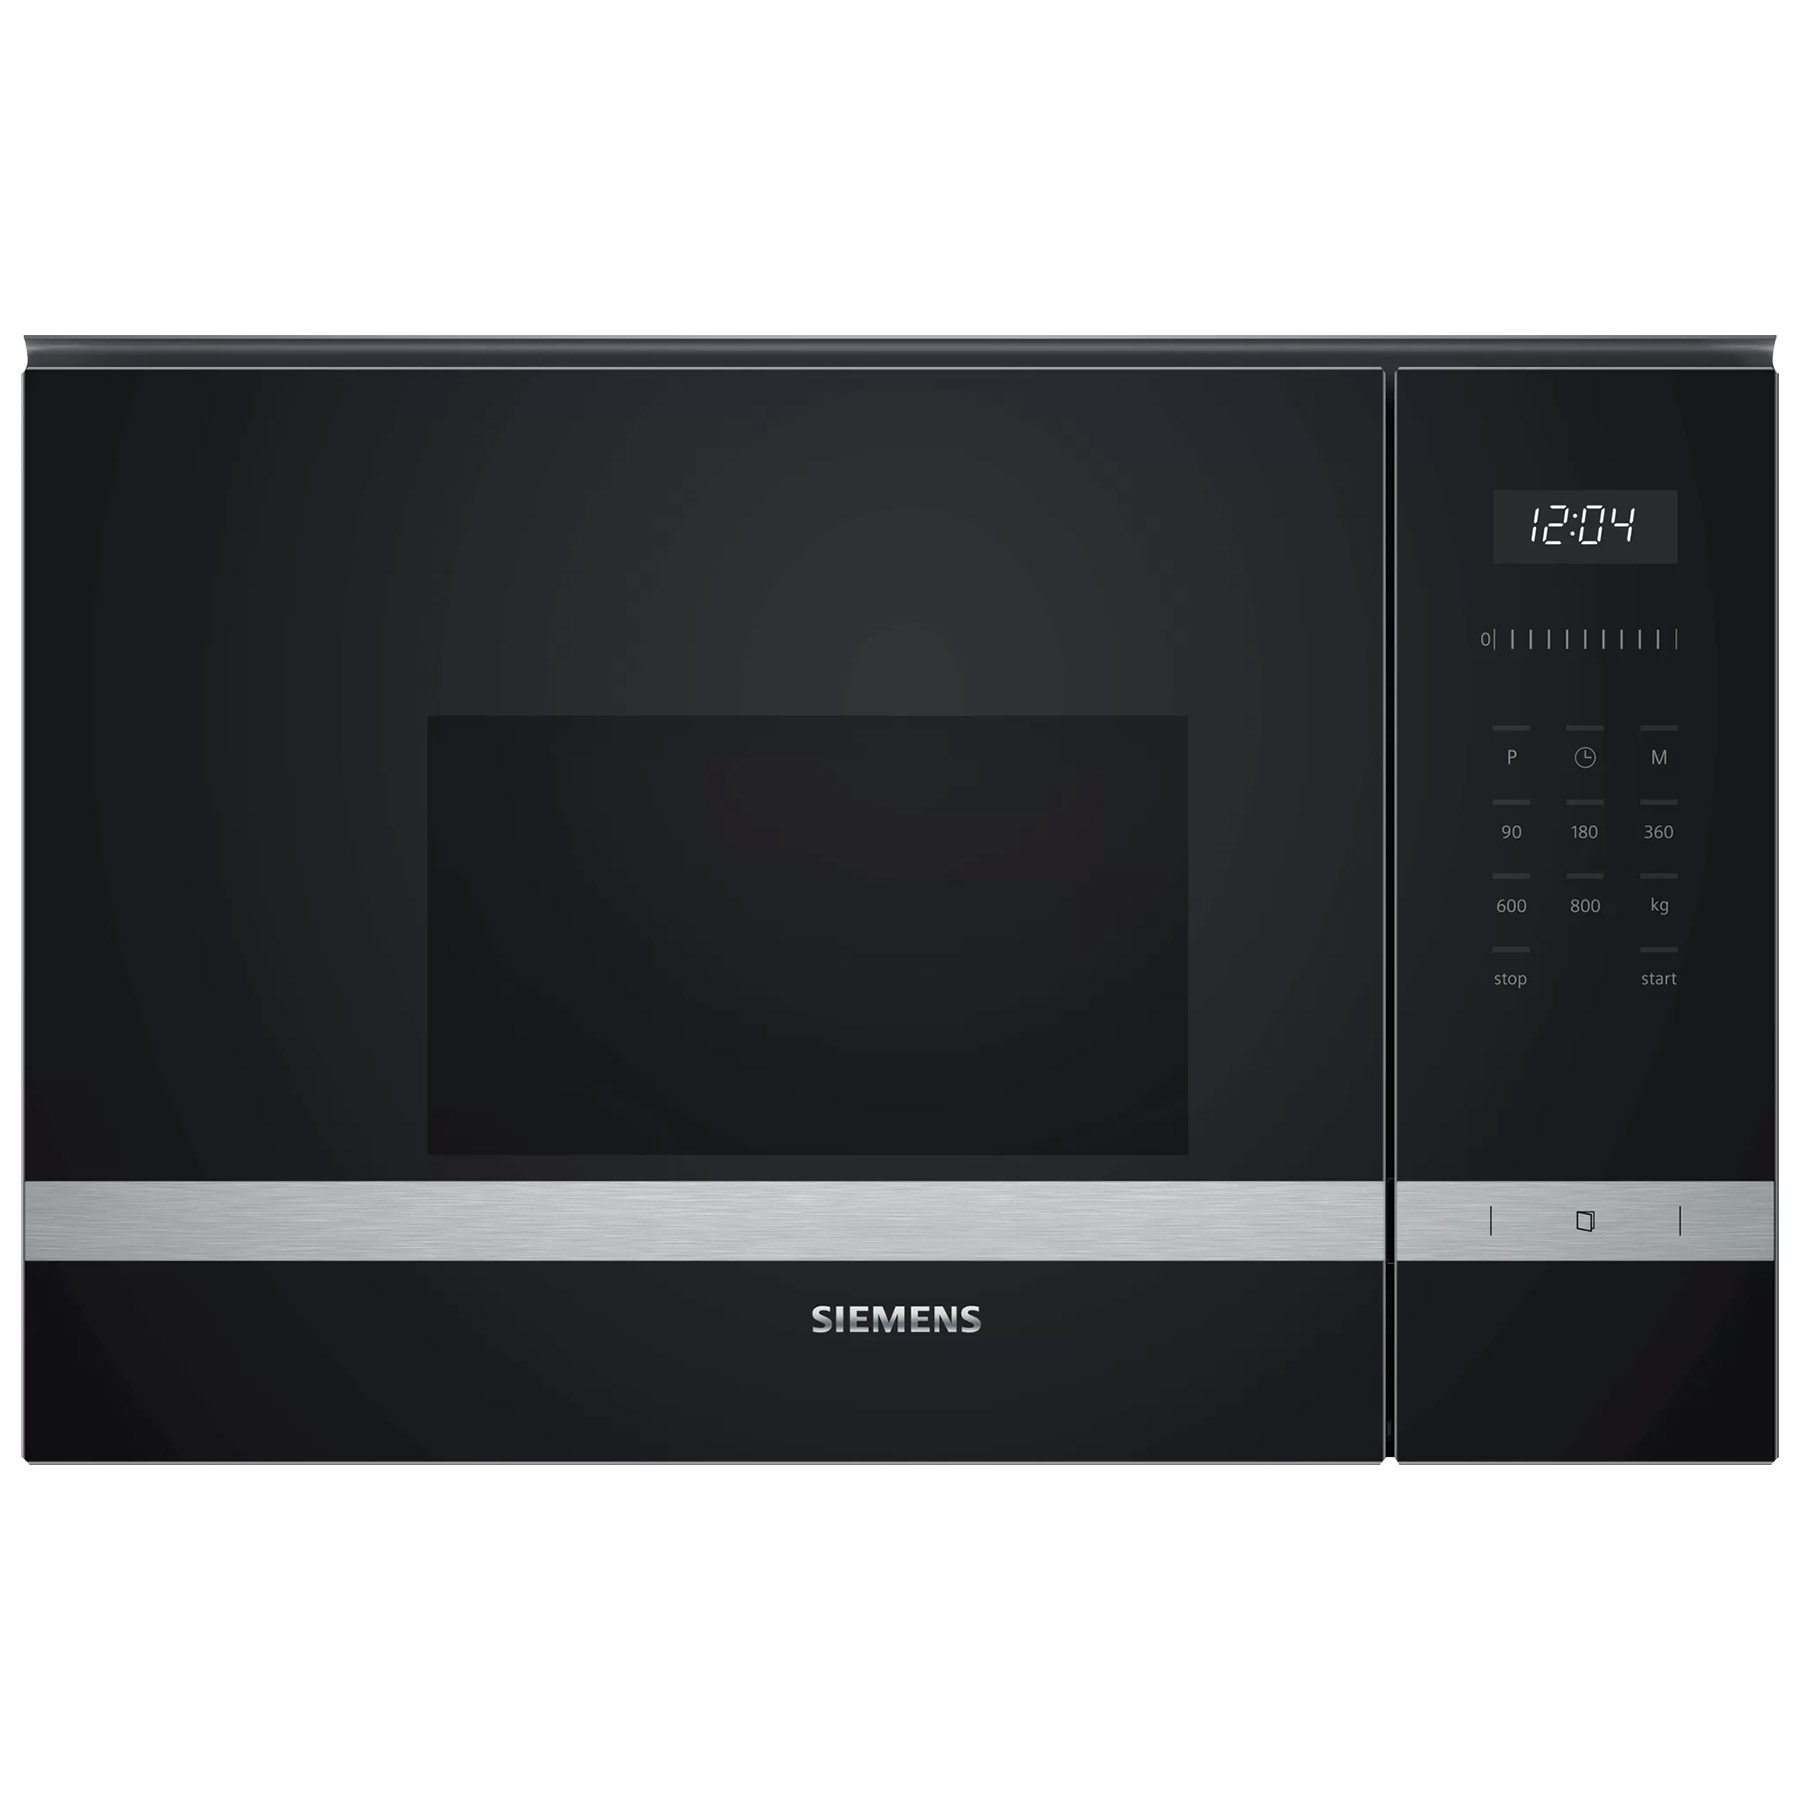 Siemens BF525LMS0B iQ500 Built In Microwave Oven in St Steel 800W 20L